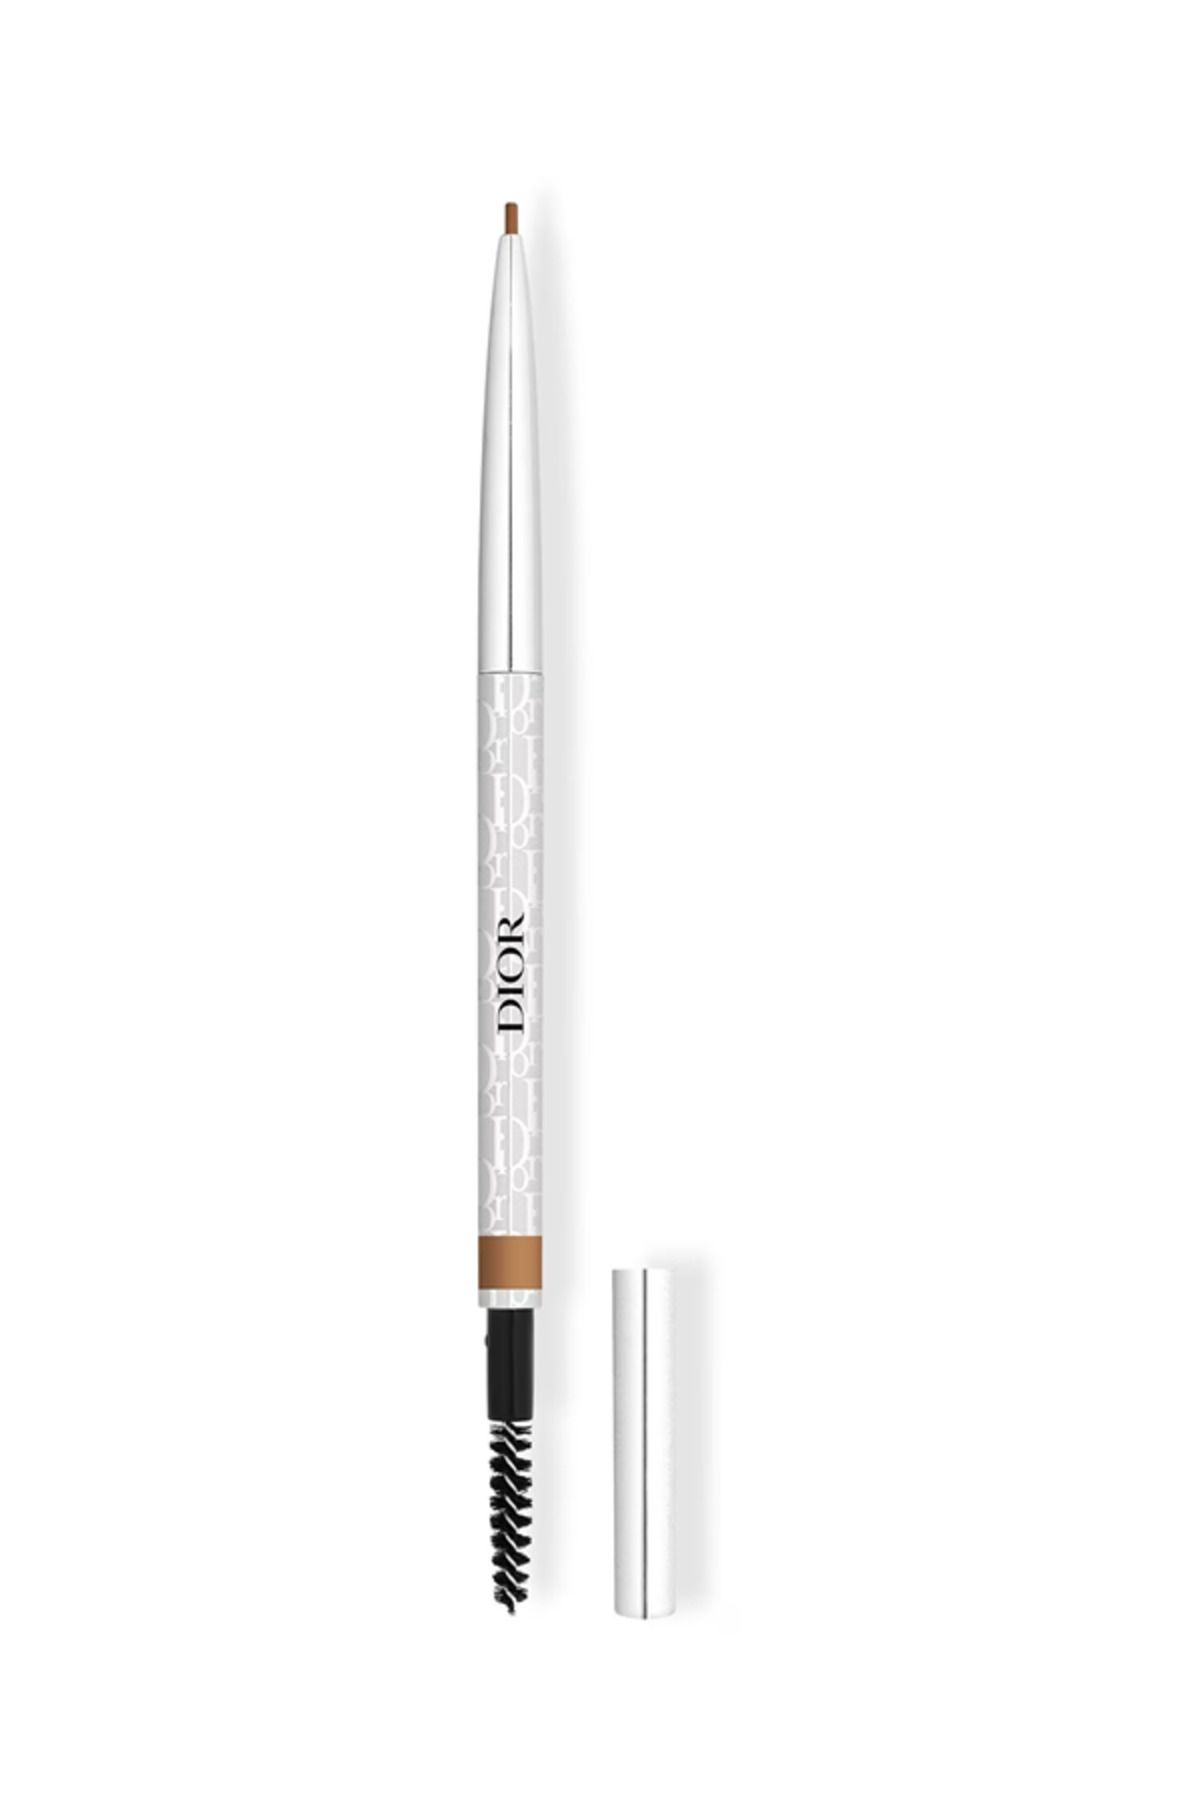 Dior DİORSHOW BROW STYLER - EYEBROW PENCİL THAT PLUMPS THE EYEBROWS PSSN2097